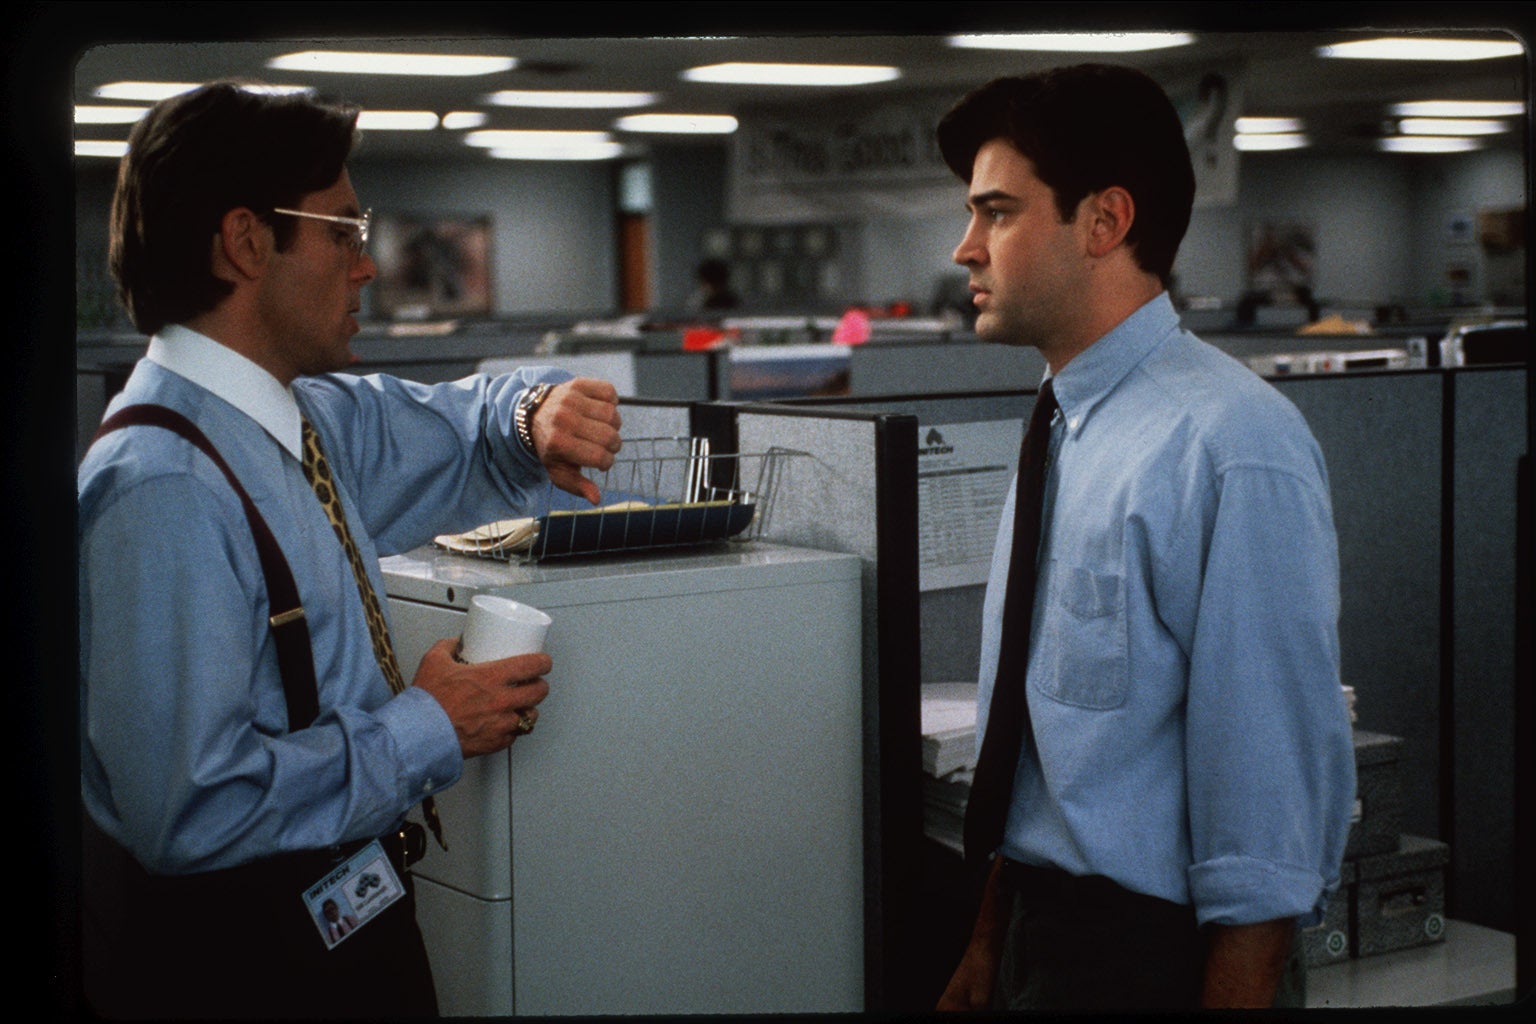 A disgruntled computer programmer named Peter, played by Ron Livingston (right) endures another lecture by his boss, played by Gary Cole, in this scene from the 1999 movie "Office Space."